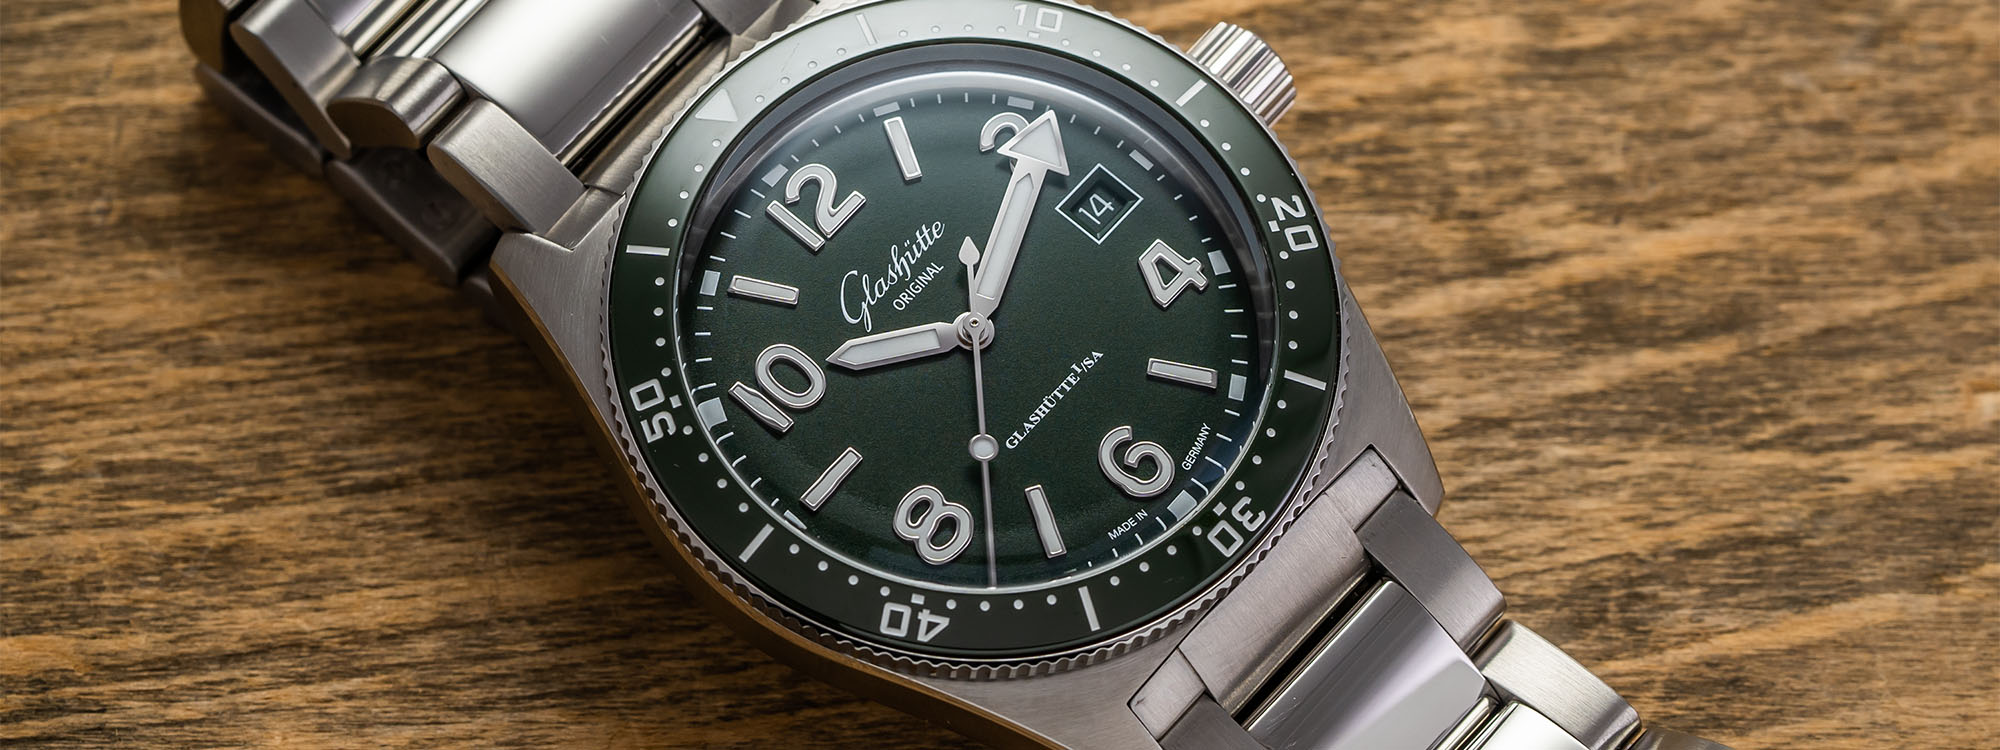 40 Green Dial Watches, From Entry-Level to Luxury